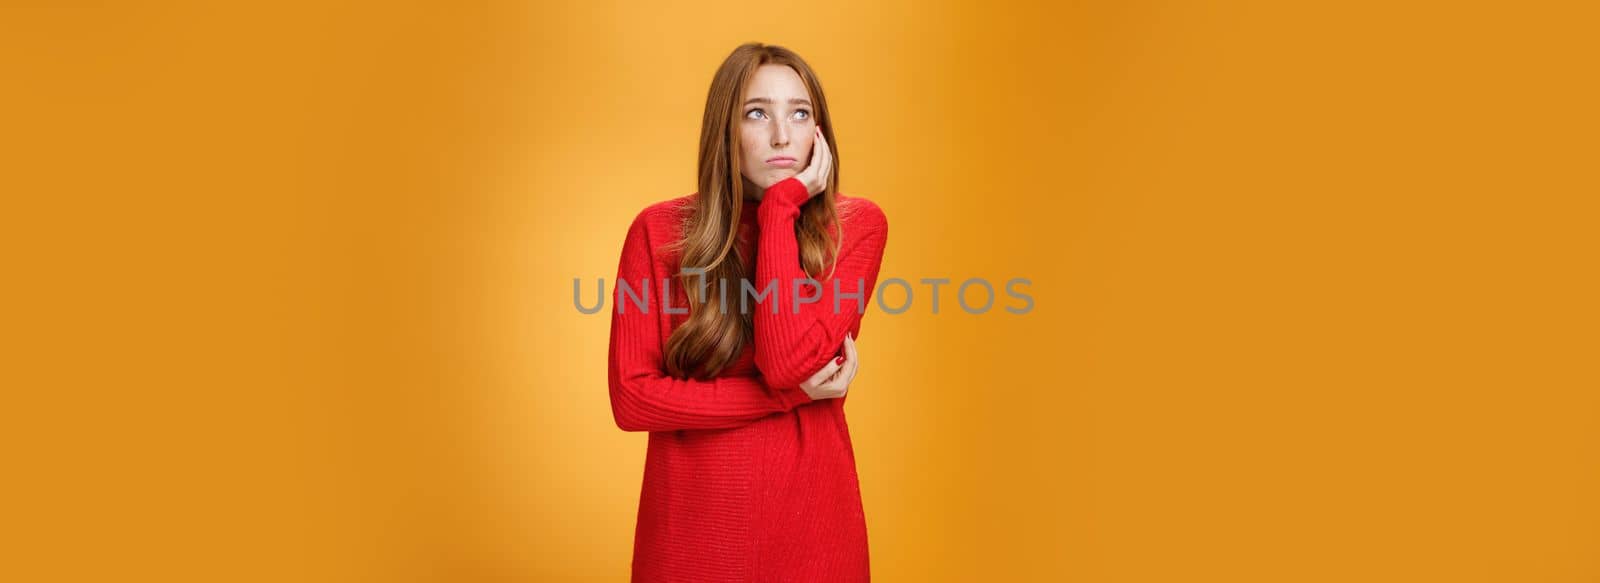 Lifestyle. Sorrow and upset lonely woman leaning head on palm in upset pose looking gloomy at upper left corner as remembering unhappy story or being bored standing uneasy over orange wall.